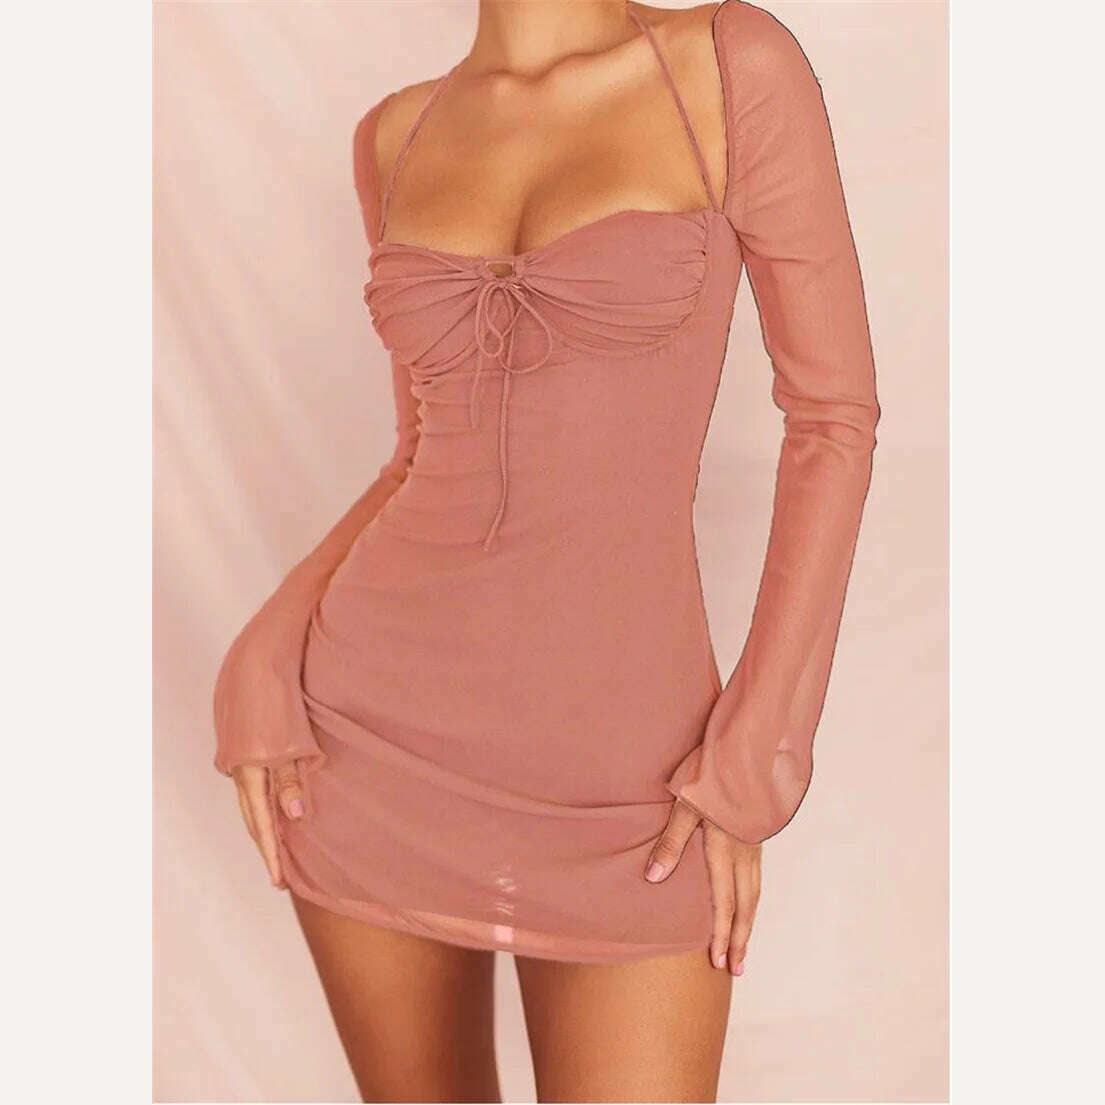 KIMLUD, Hot Sale Women's Halter Bodycon Mini Dress, Long Sleeve Ruched Bust Solid Color Sexy Club Dress, Blak/Brown/Pink/White, S/M/L, KIMLUD Women's Clothes